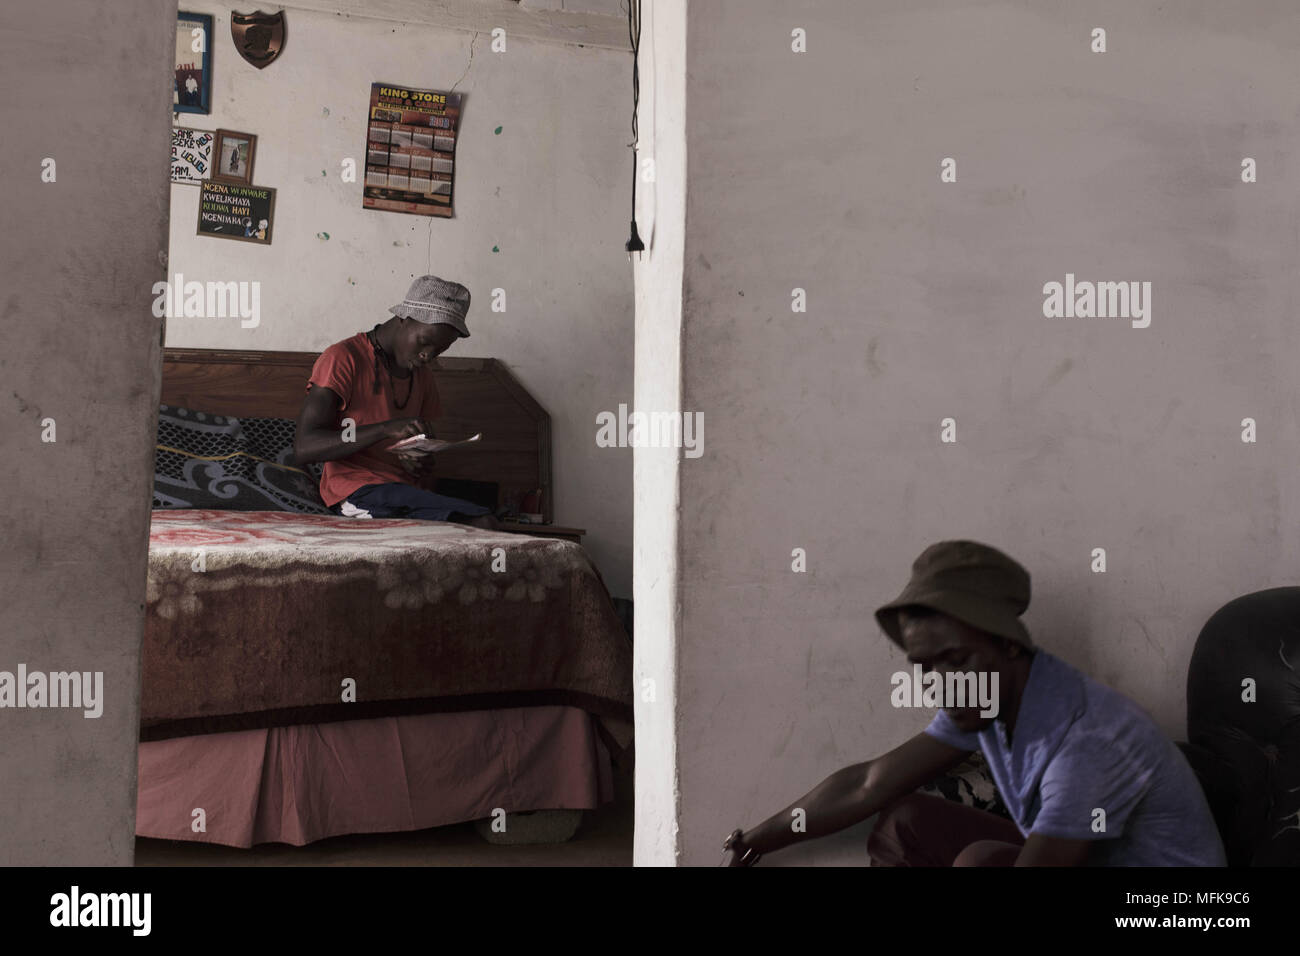 January 12, 2018 - Matatiele, Eastern Cape, South Africa - Jake, 23, sits on his bed and smokes cannabis. He says: 'I have nothing to do all day. I have finished school, but for what? There are no jobs. I am bored, and if I stay at home all day I would become crazy. To keep myself busy I wake up in the morning, then go to town and push people's trollies outside the Spar supermarket. Then I come back home to the village and sell cannabis, and hang out with my friends. I want to find a job and do something meaningful with my life. But there is nothing. You have to be very lucky to find a job aro Stock Photo